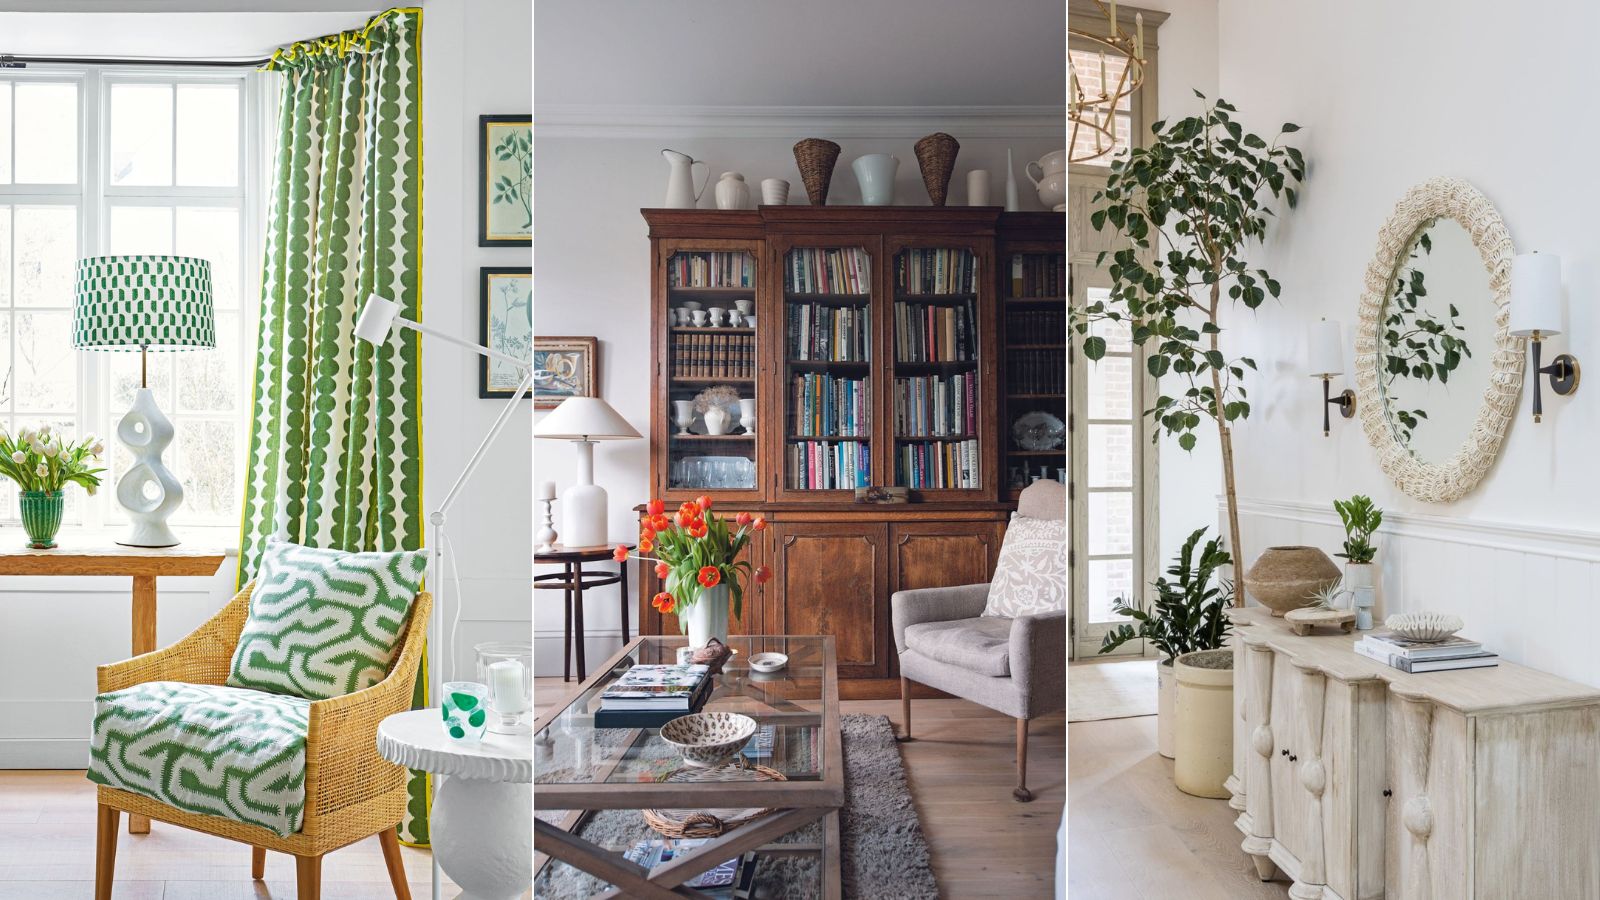 9 Cheap Furniture Items That Make Your House Look Rich